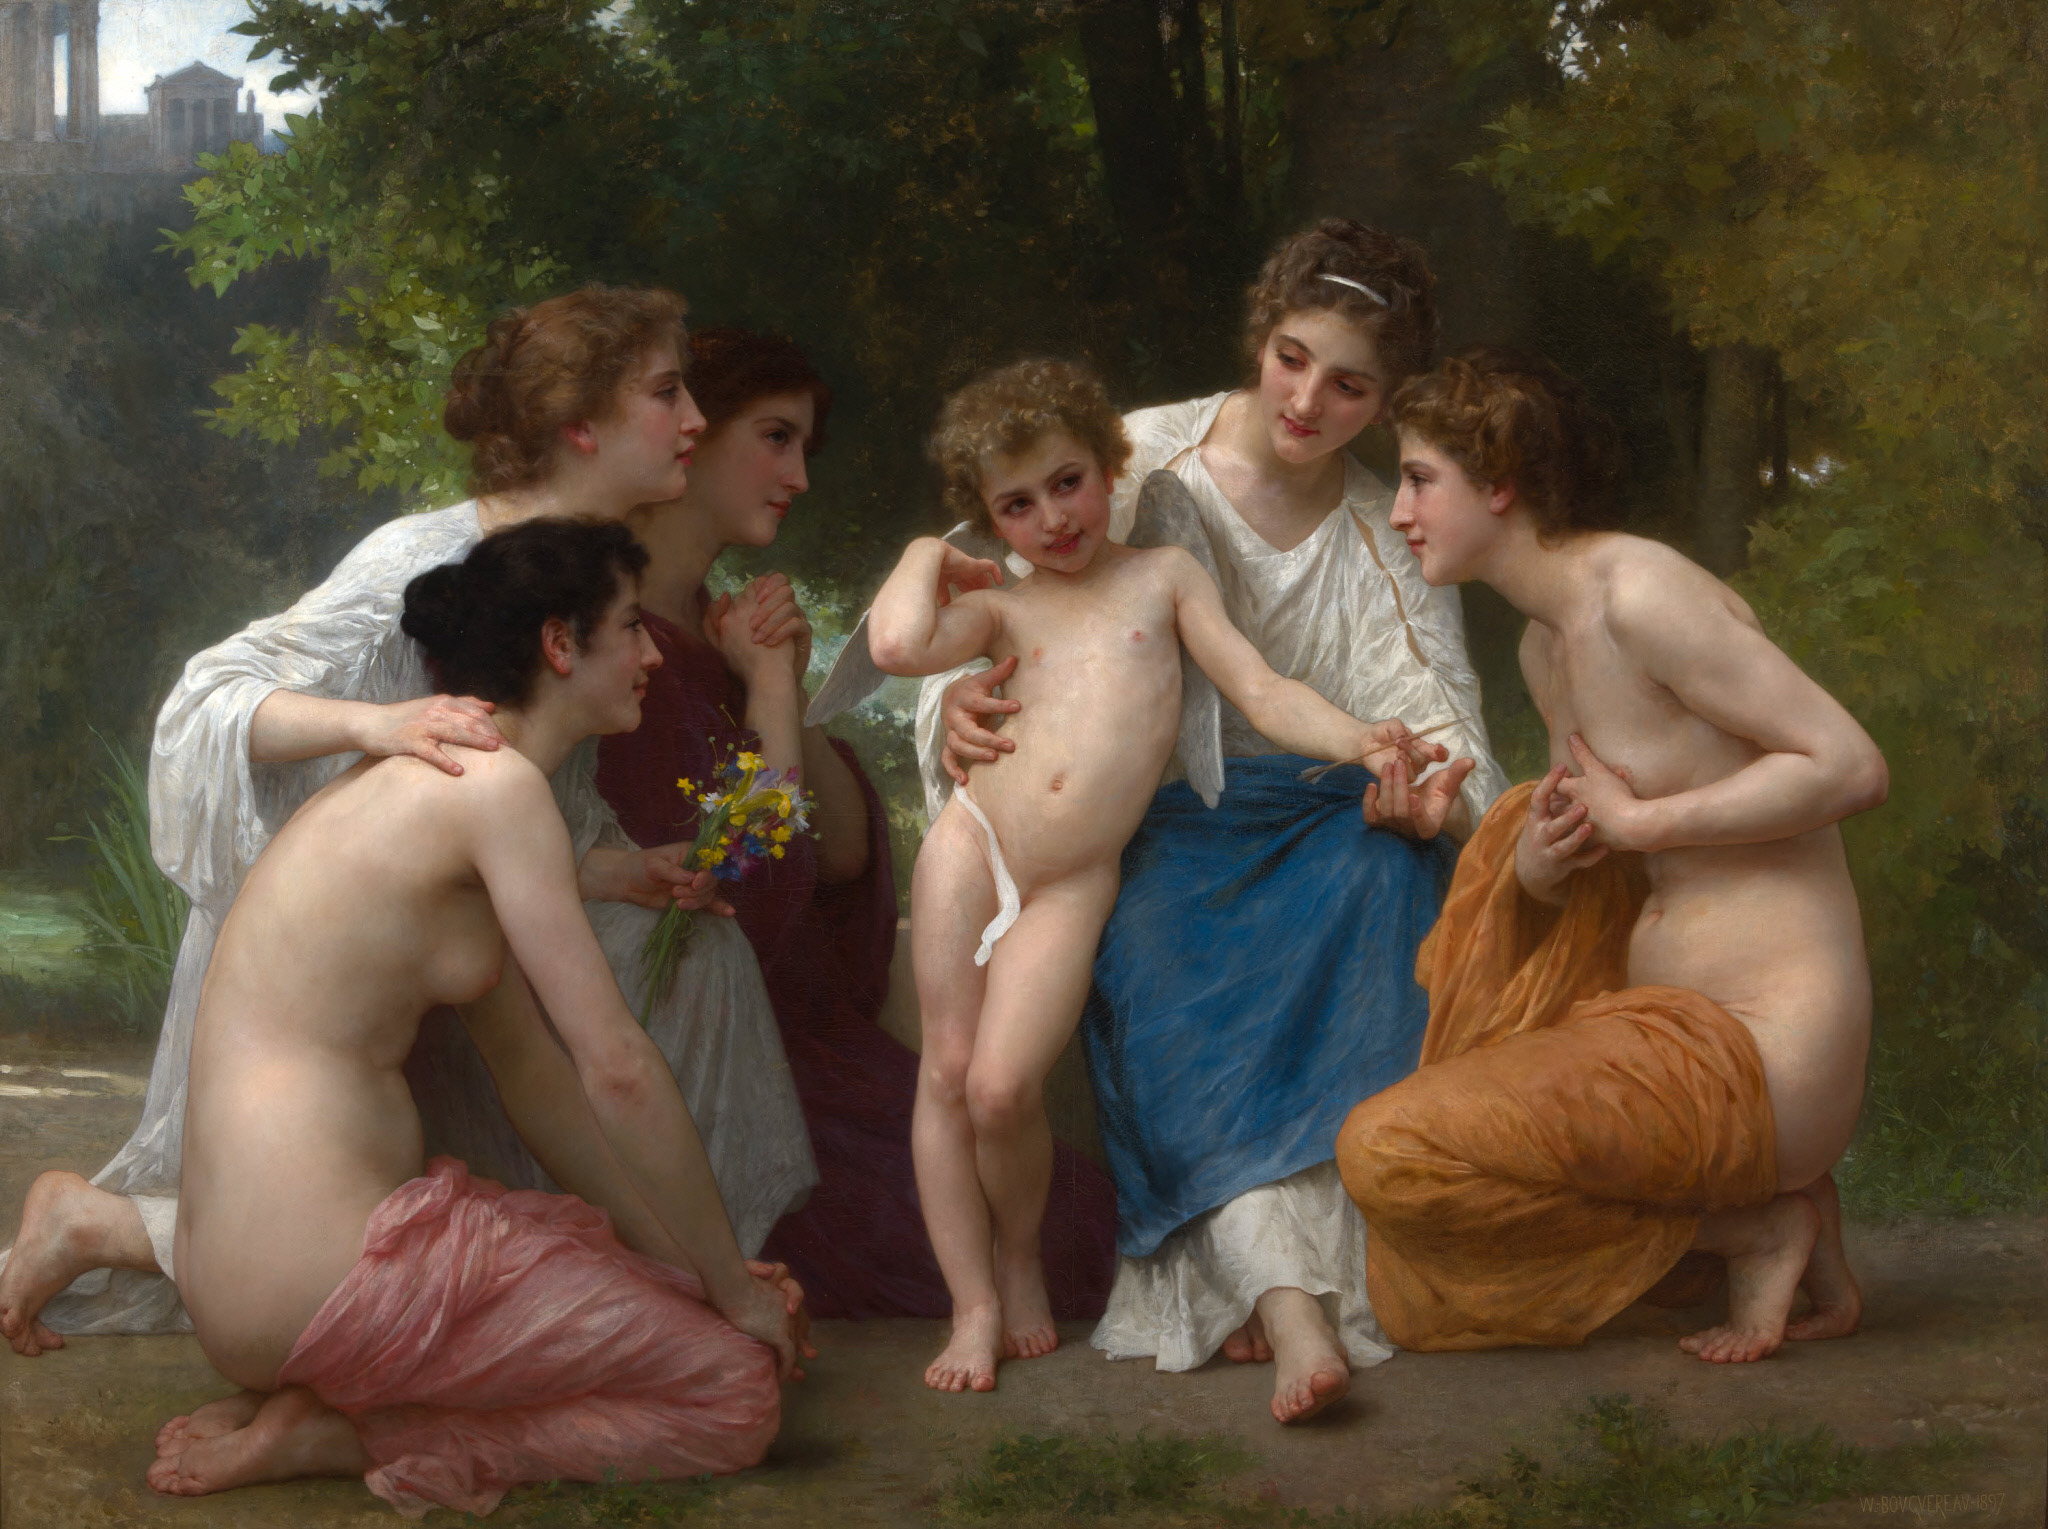 Image Credit:William-Adolphe Bouguereau (French, 1825 - 1905). Admiration, 1897. Oil on canvas. 58 x 78 in. (147.3 x 198.1 cm). Bequest of Mort D. Goldberg, 59.46.10.